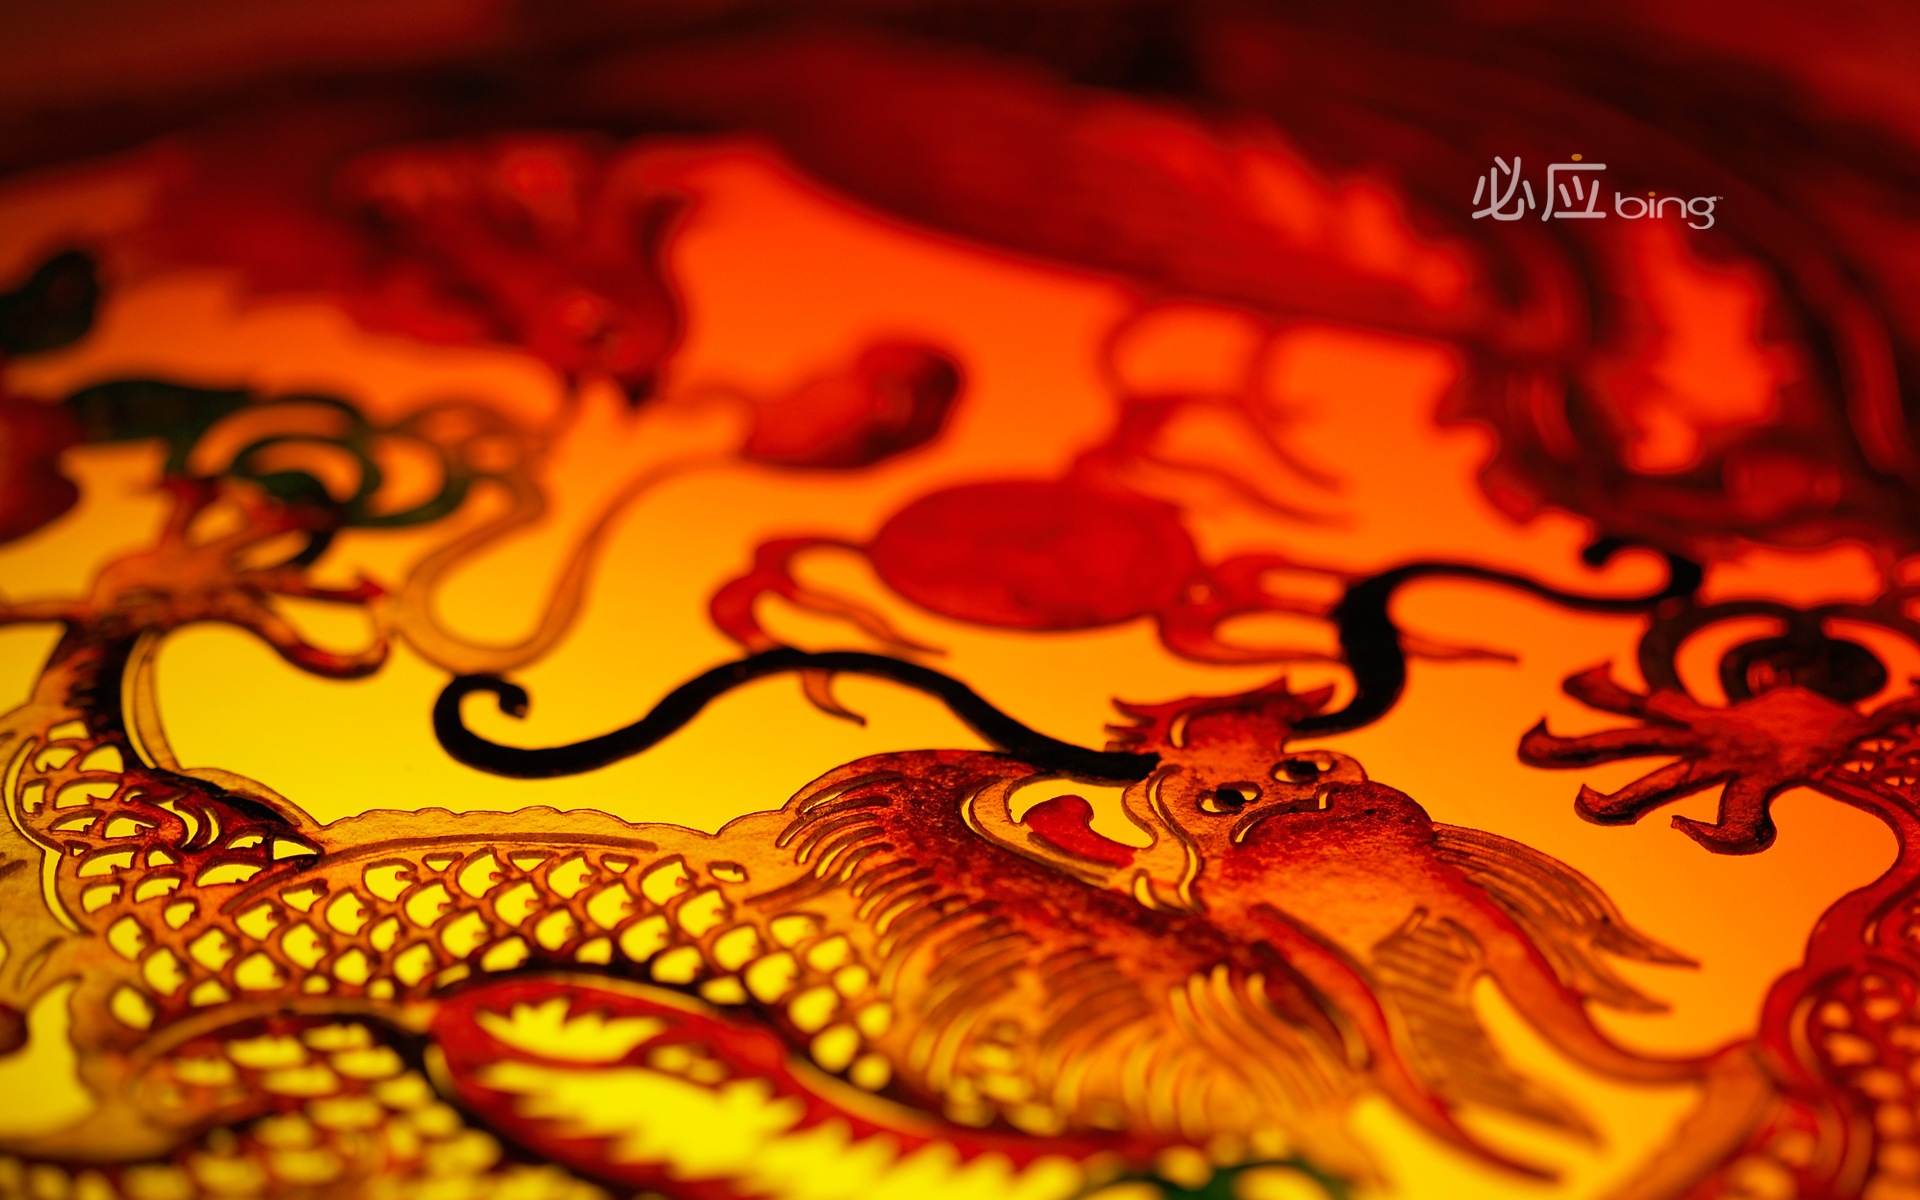 Bing selection best HD wallpapers: China theme wallpaper (2) #12 - 1920x1200